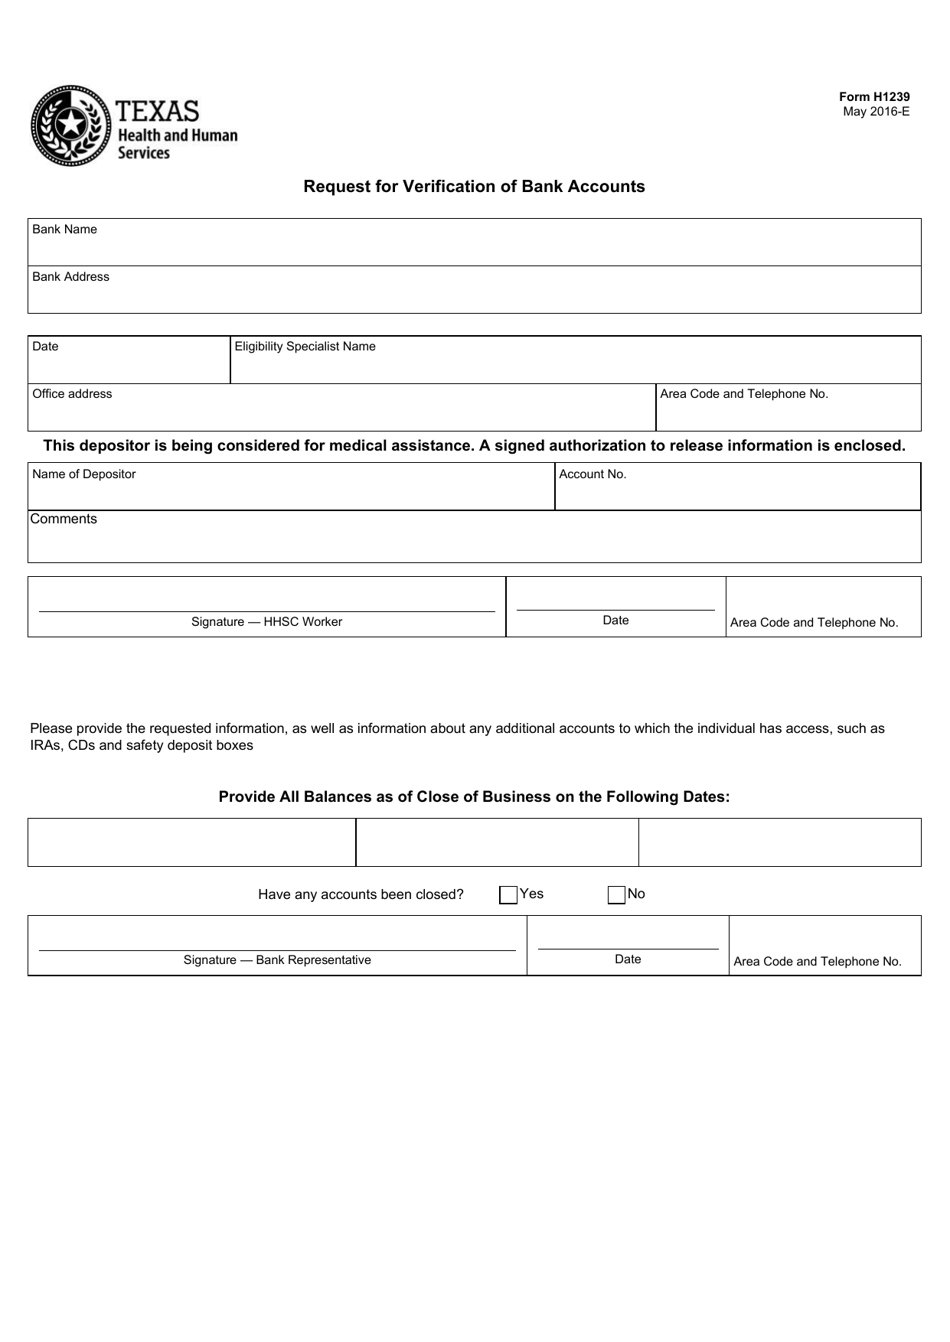 Form H1239 Request for Verification of Bank Accounts - Texas, Page 1